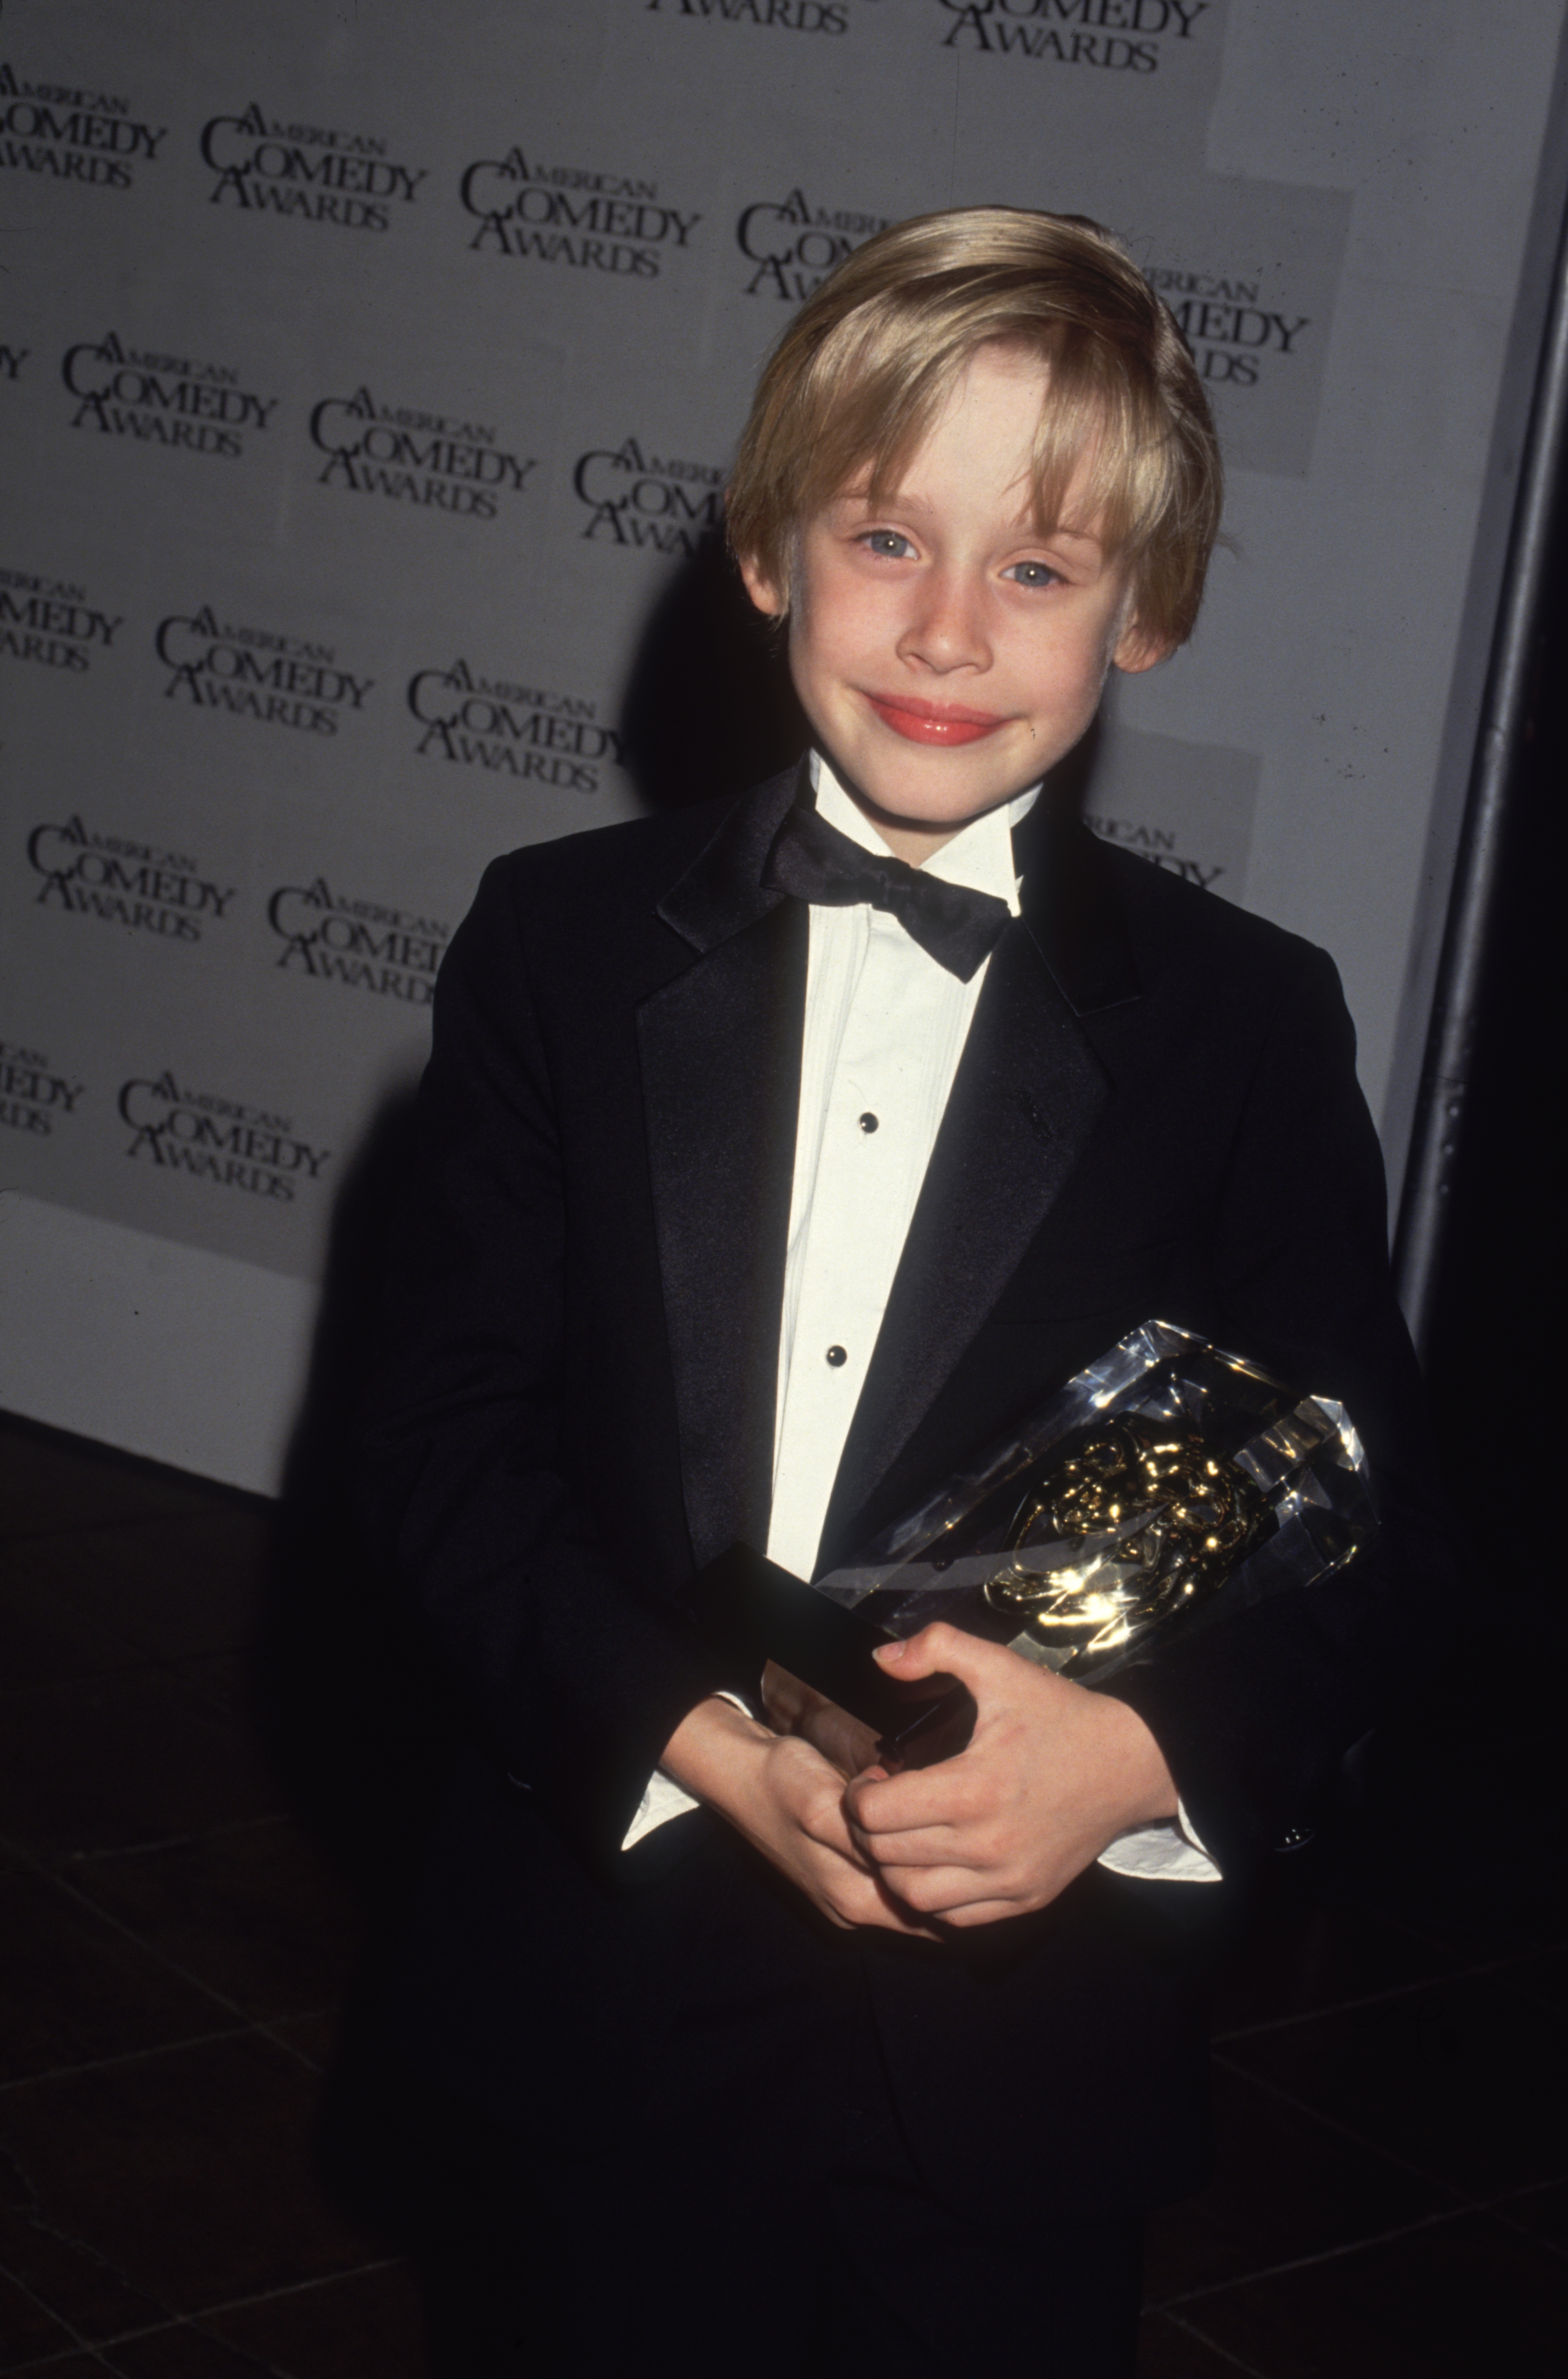 Macaulay Culkin aux American Comedy Awards en 1991 | Source : Getty Images